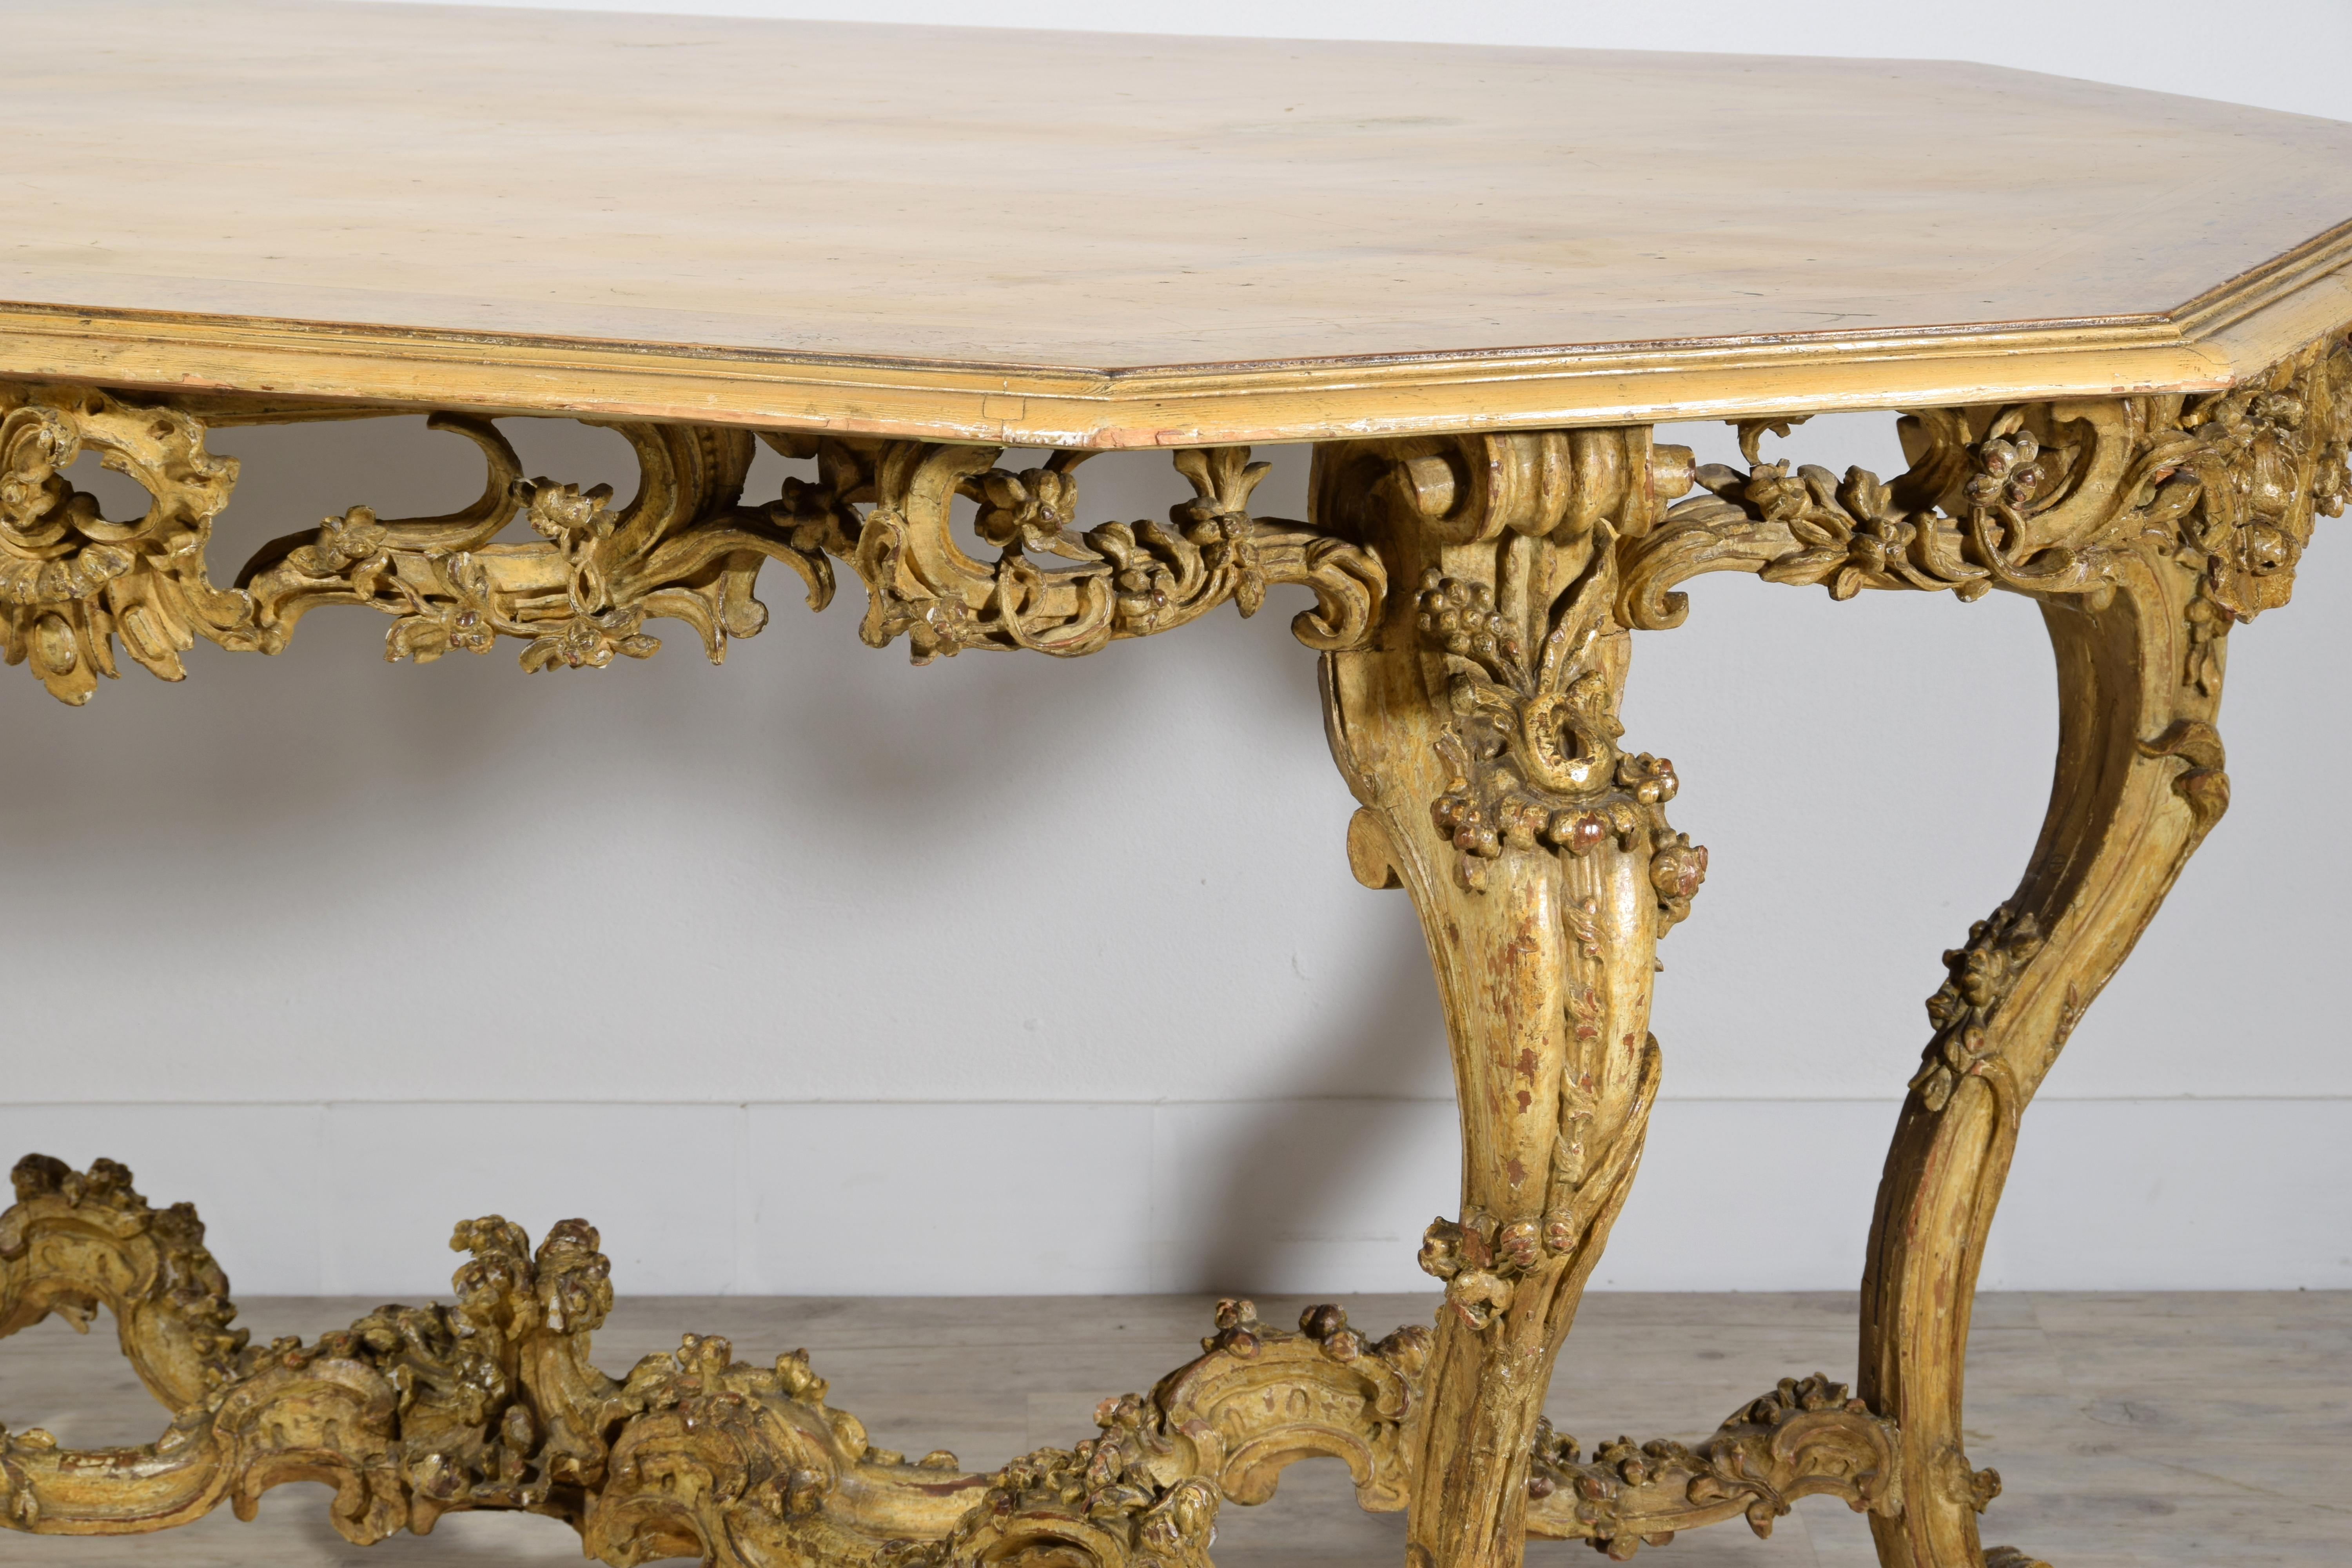 Italian Baroque Carved Gilt and Lacquered Wood Center Table, 18th Century For Sale 16